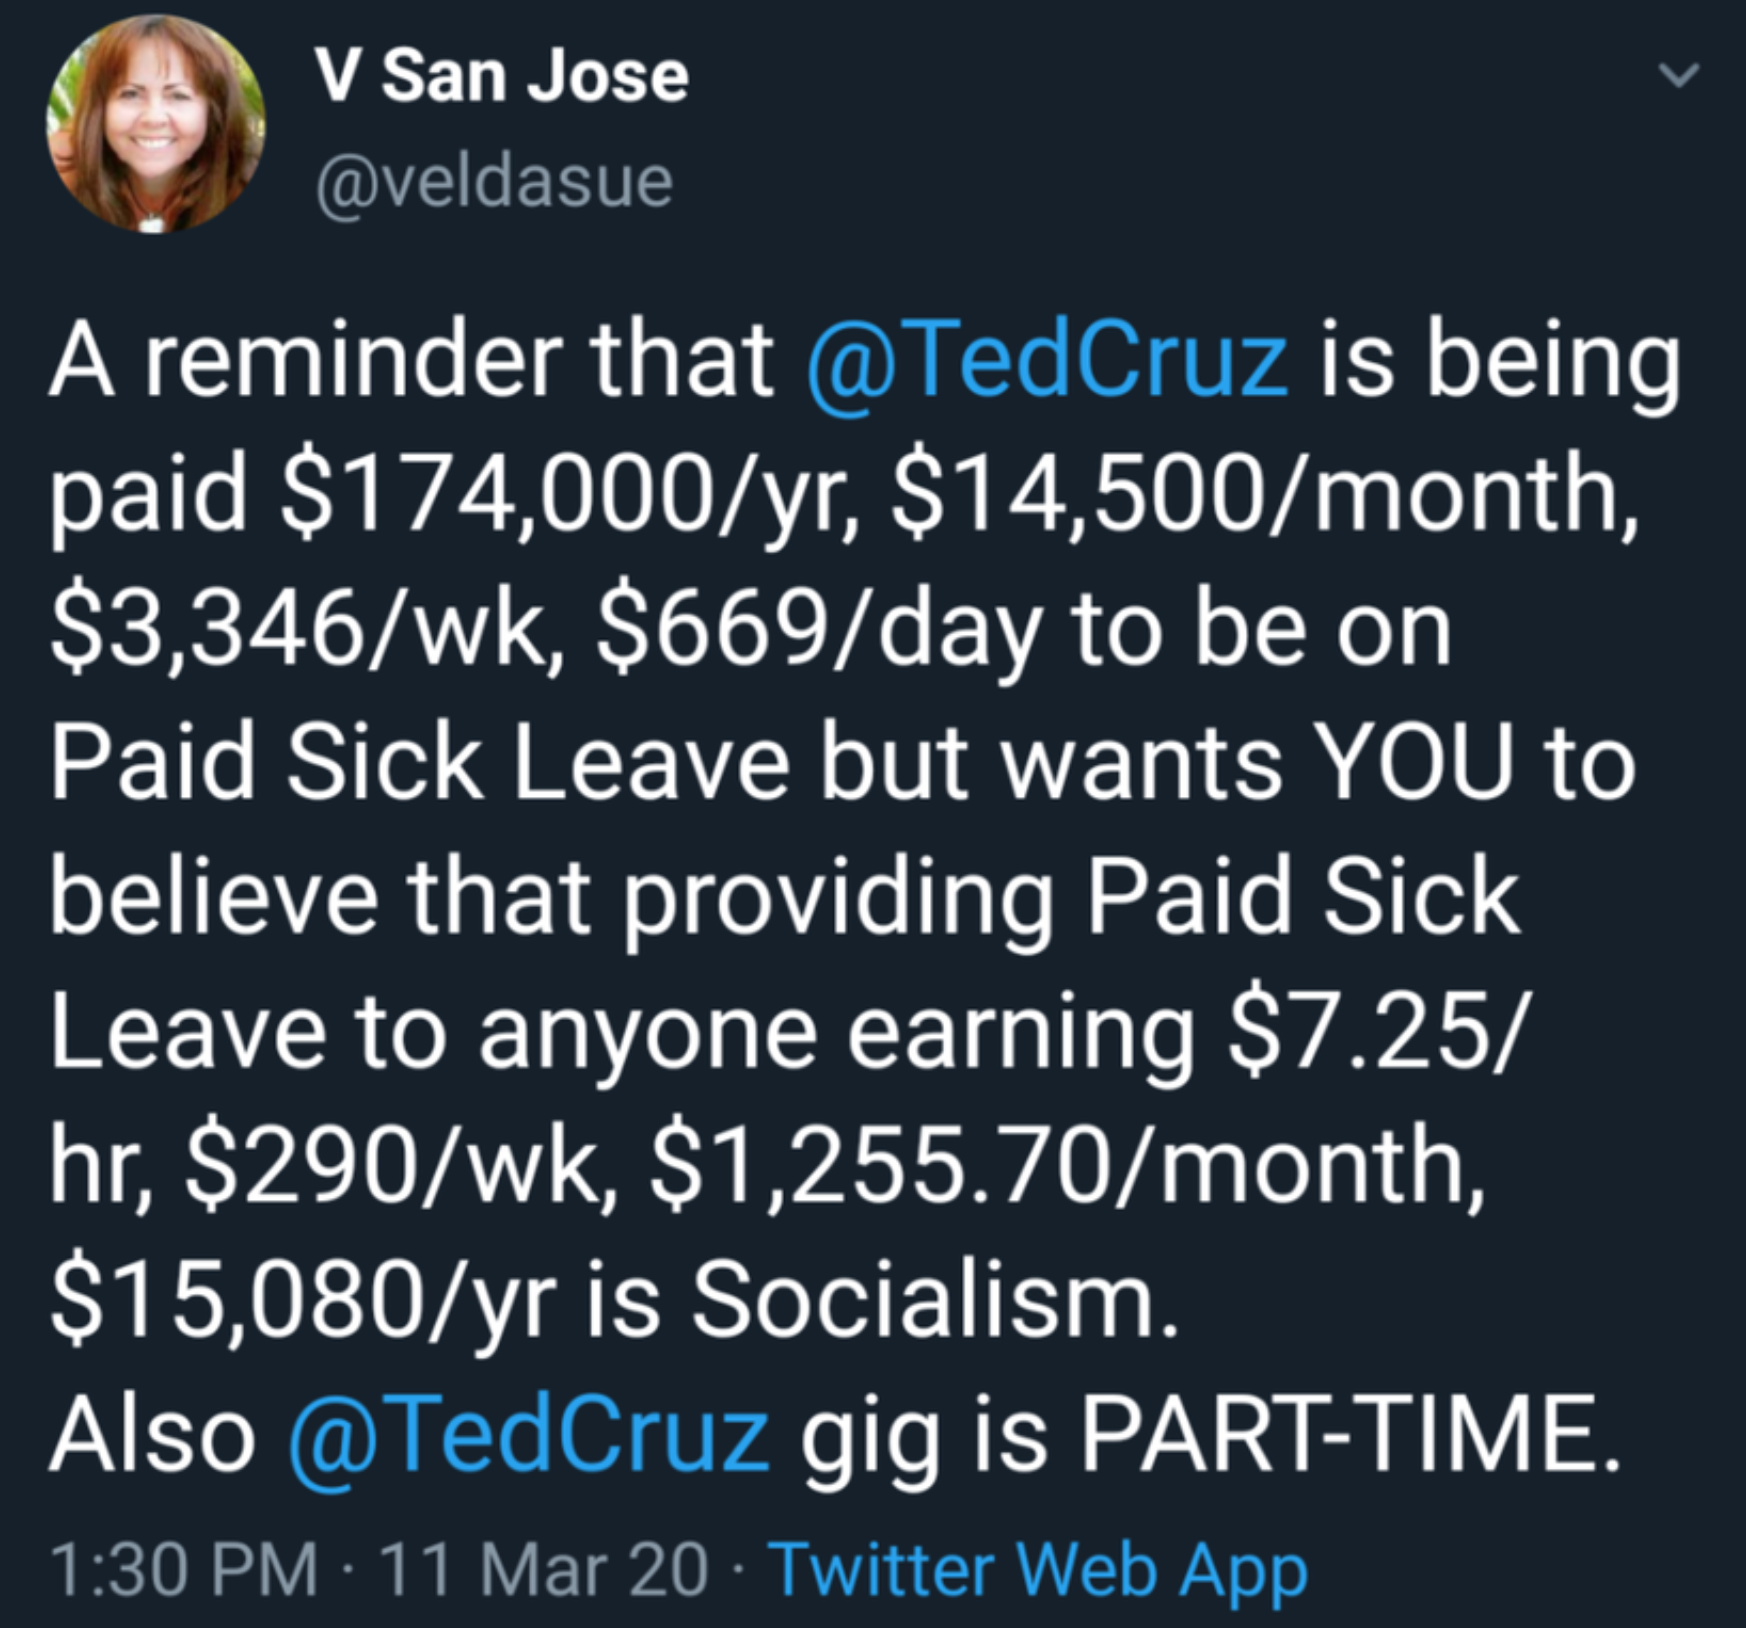 keep you plump as a partridge - V San Jose A reminder that is being paid $174,000yr, $14,500month, $3,346wk, $669day to be on Paid Sick Leave but wants You to believe that providing Paid Sick Leave to anyone earning $7.25 hr, $290wk, $1,255.70month, $15,0